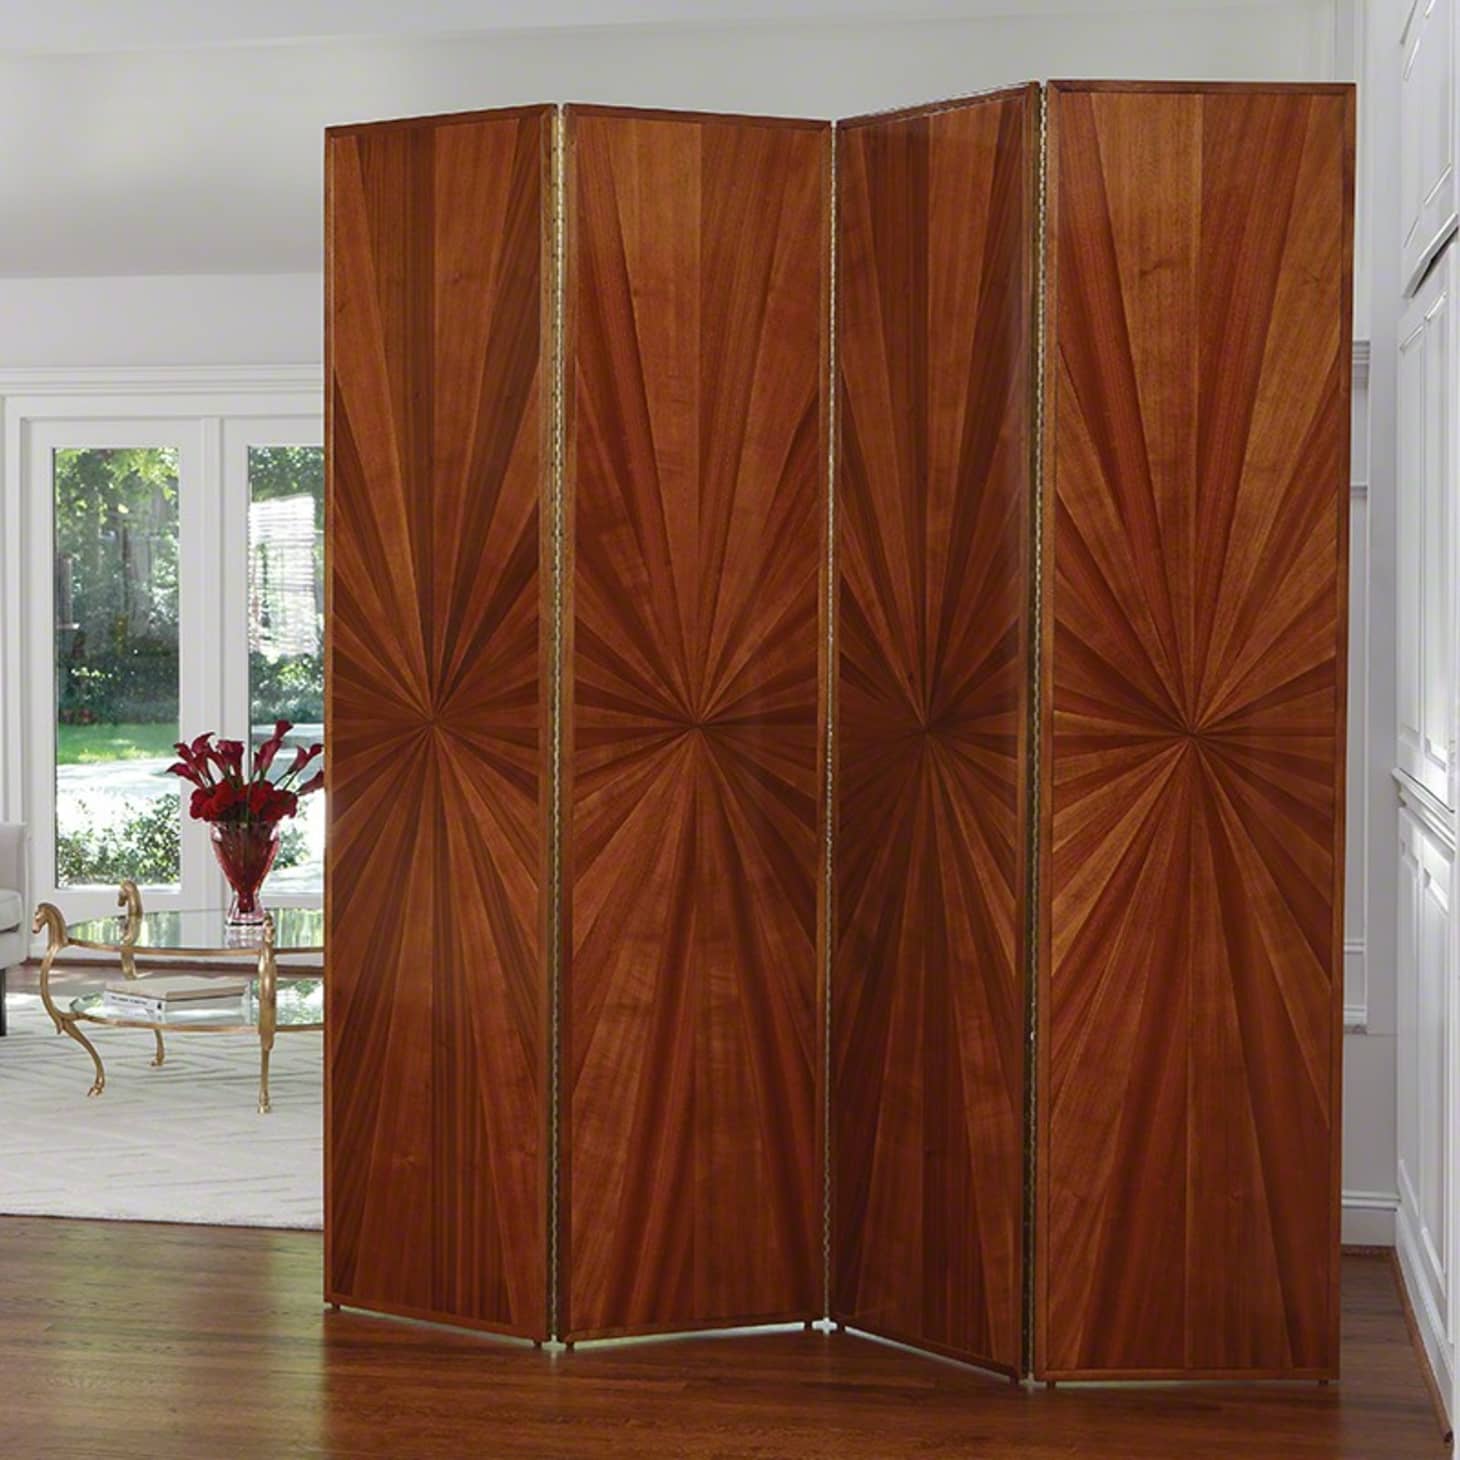 10 Best Room Dividers & Screens to Buy | Apartment Therapy